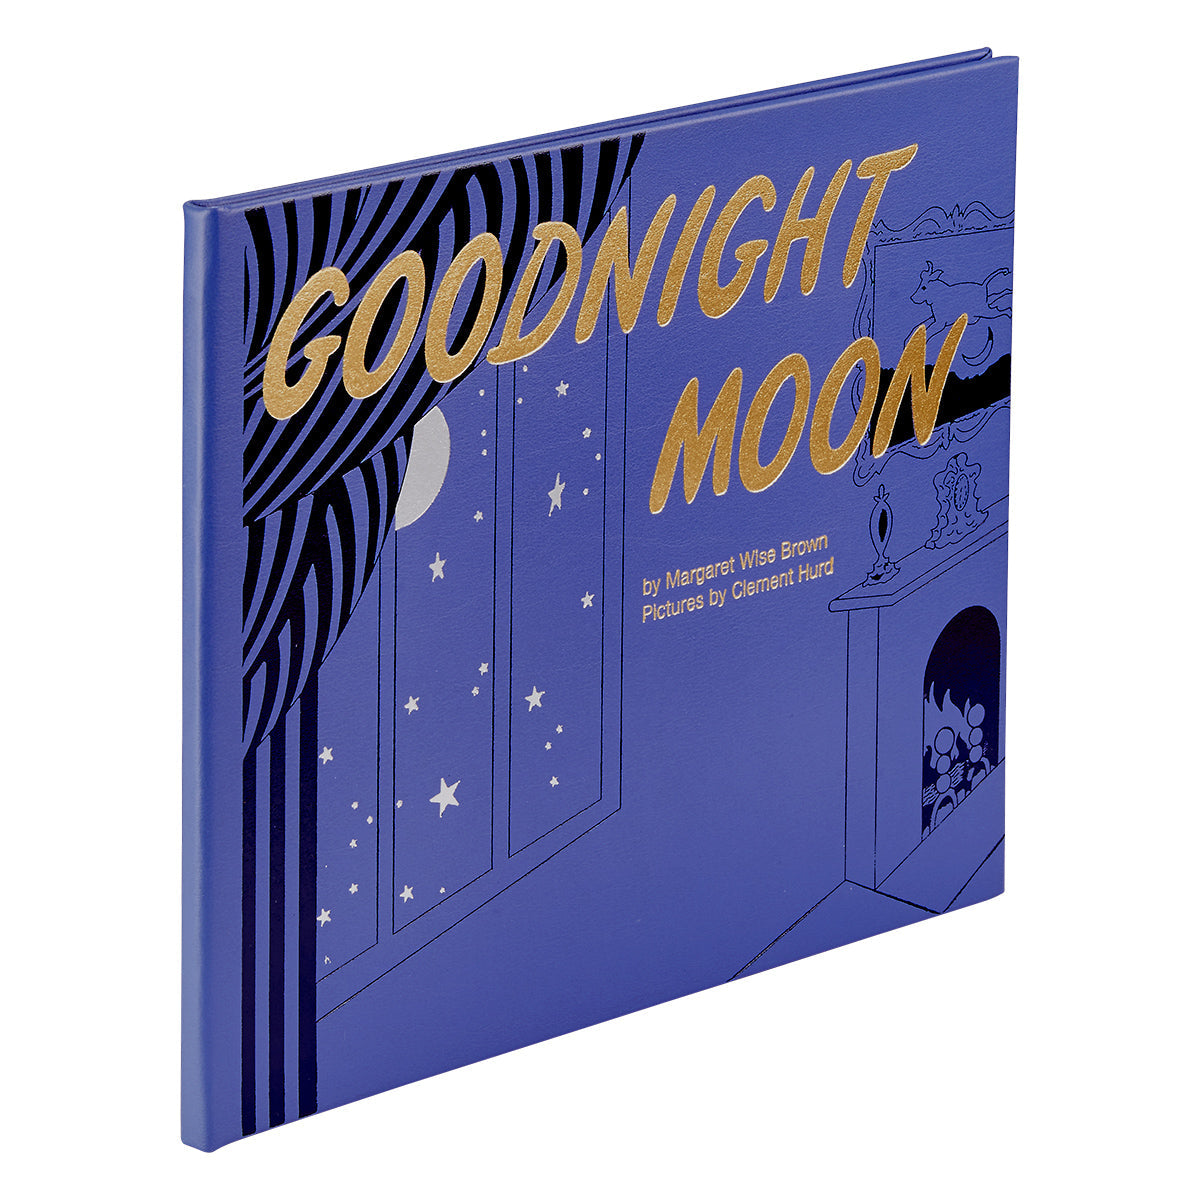 Goodnight Moon in Bonded Leather